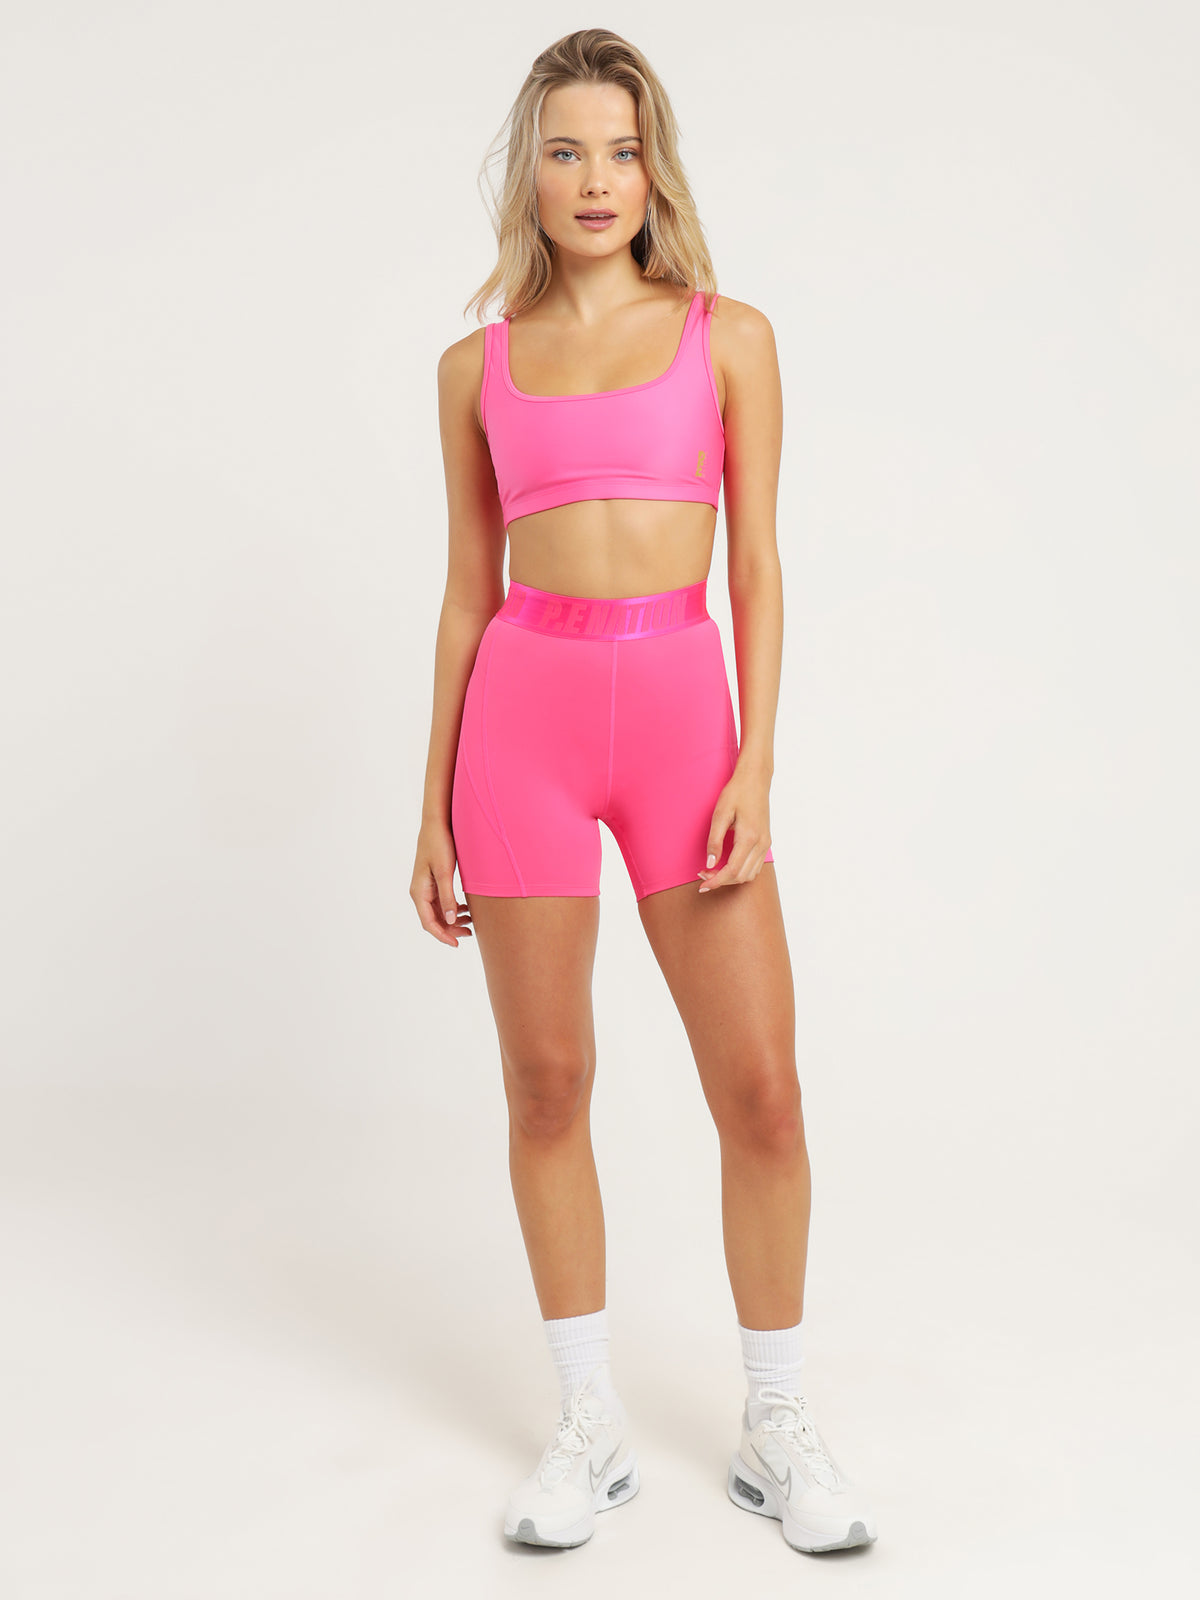 Intuitive Bike Shorts in Pink Glo